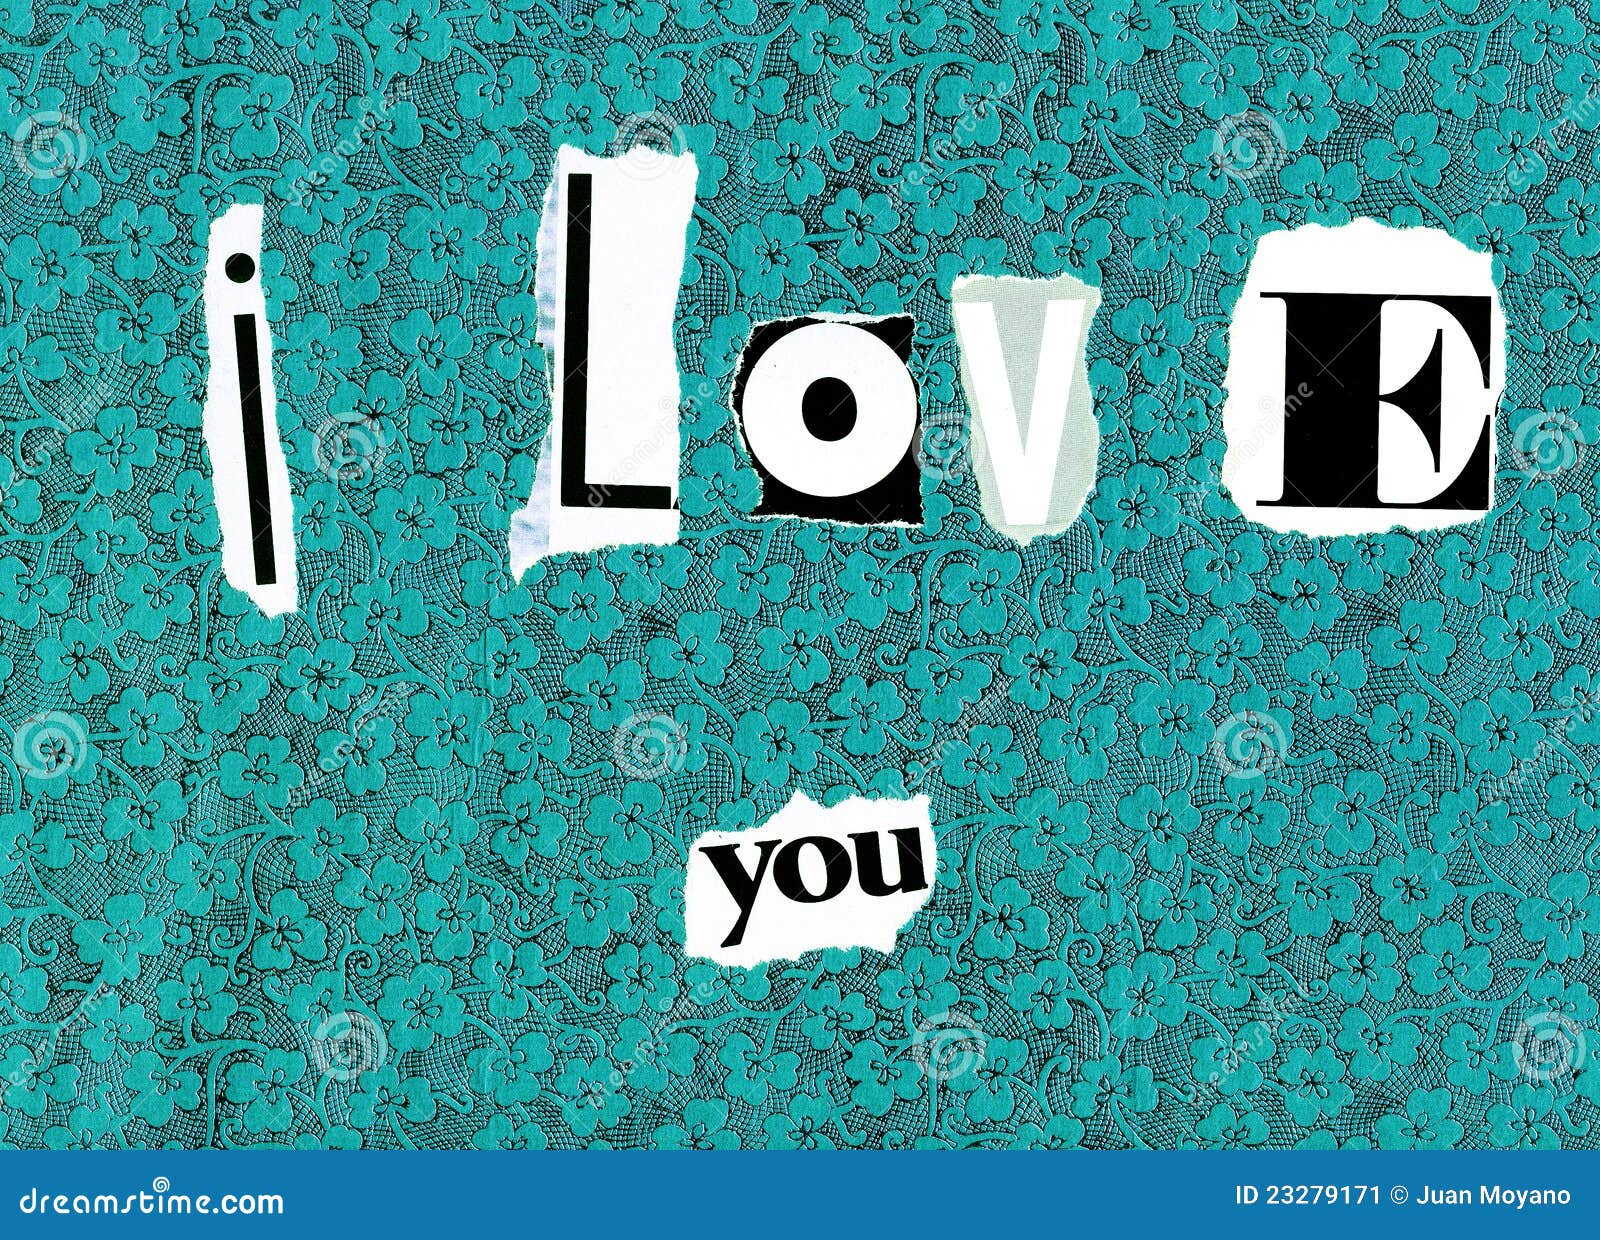 I Love You Wallpaper Backgrounds - A1 Wallpaperz For You